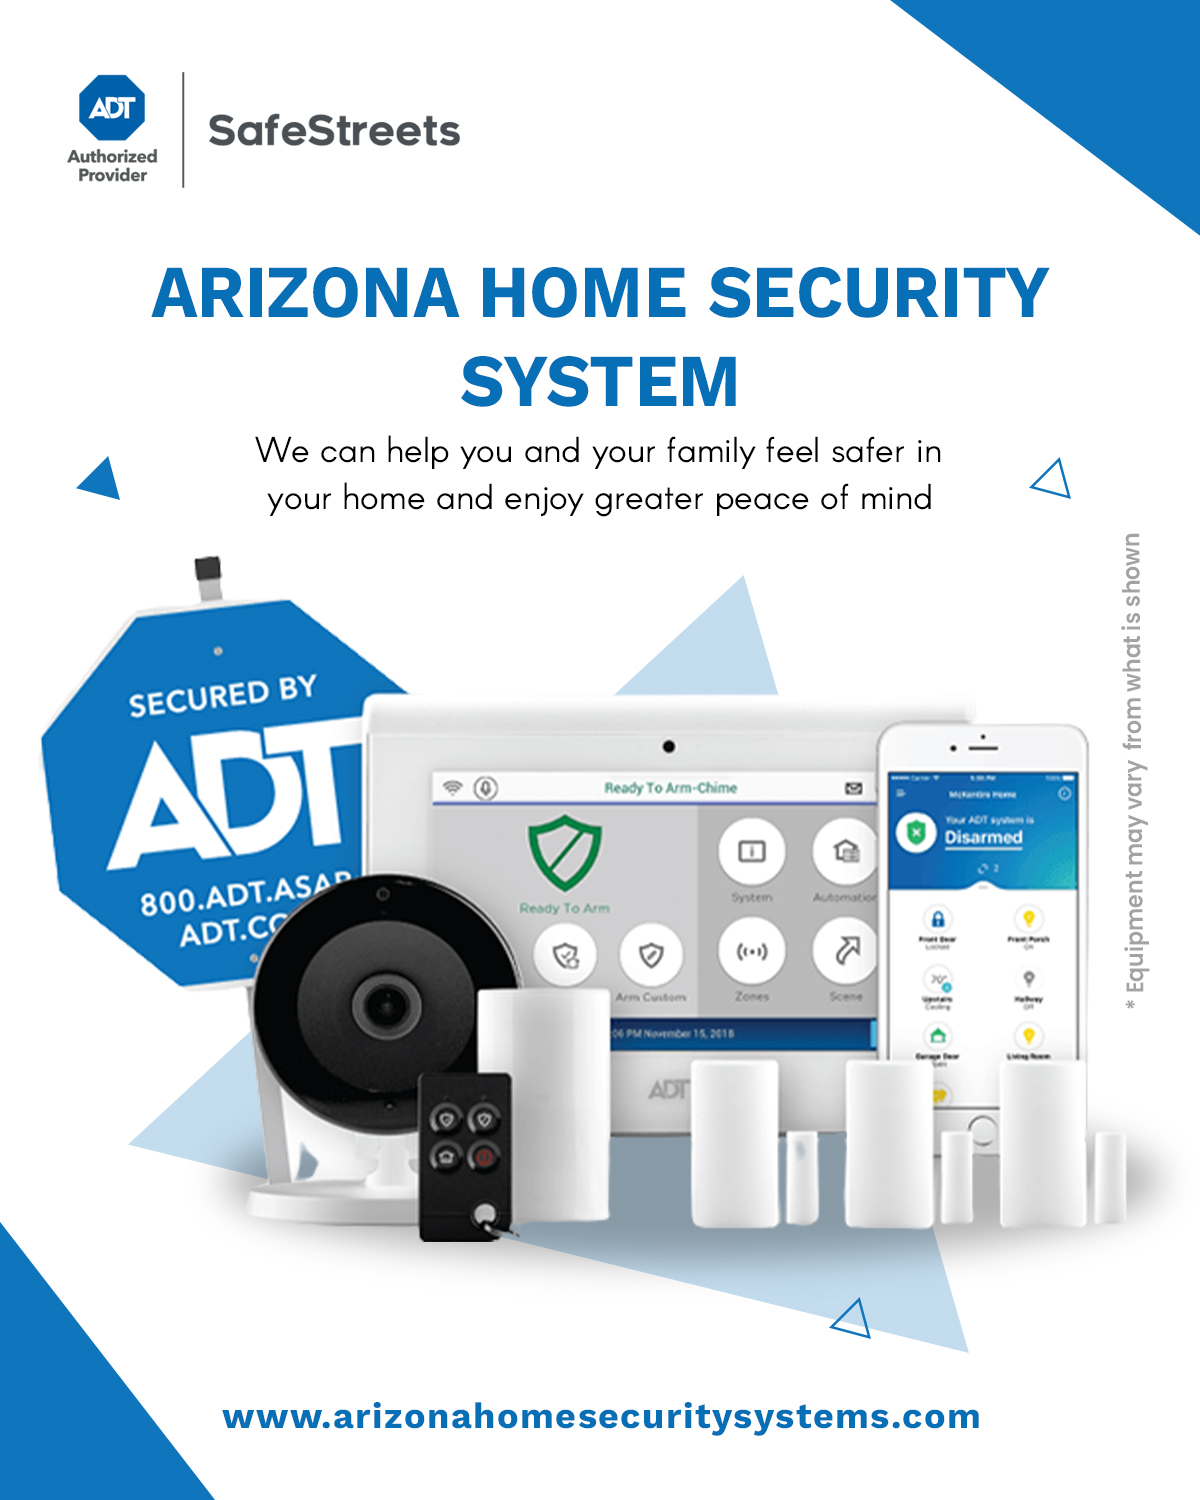 High Quality Arizona Home Security System | We Help You Provide An Unwavering Blank Meme Template